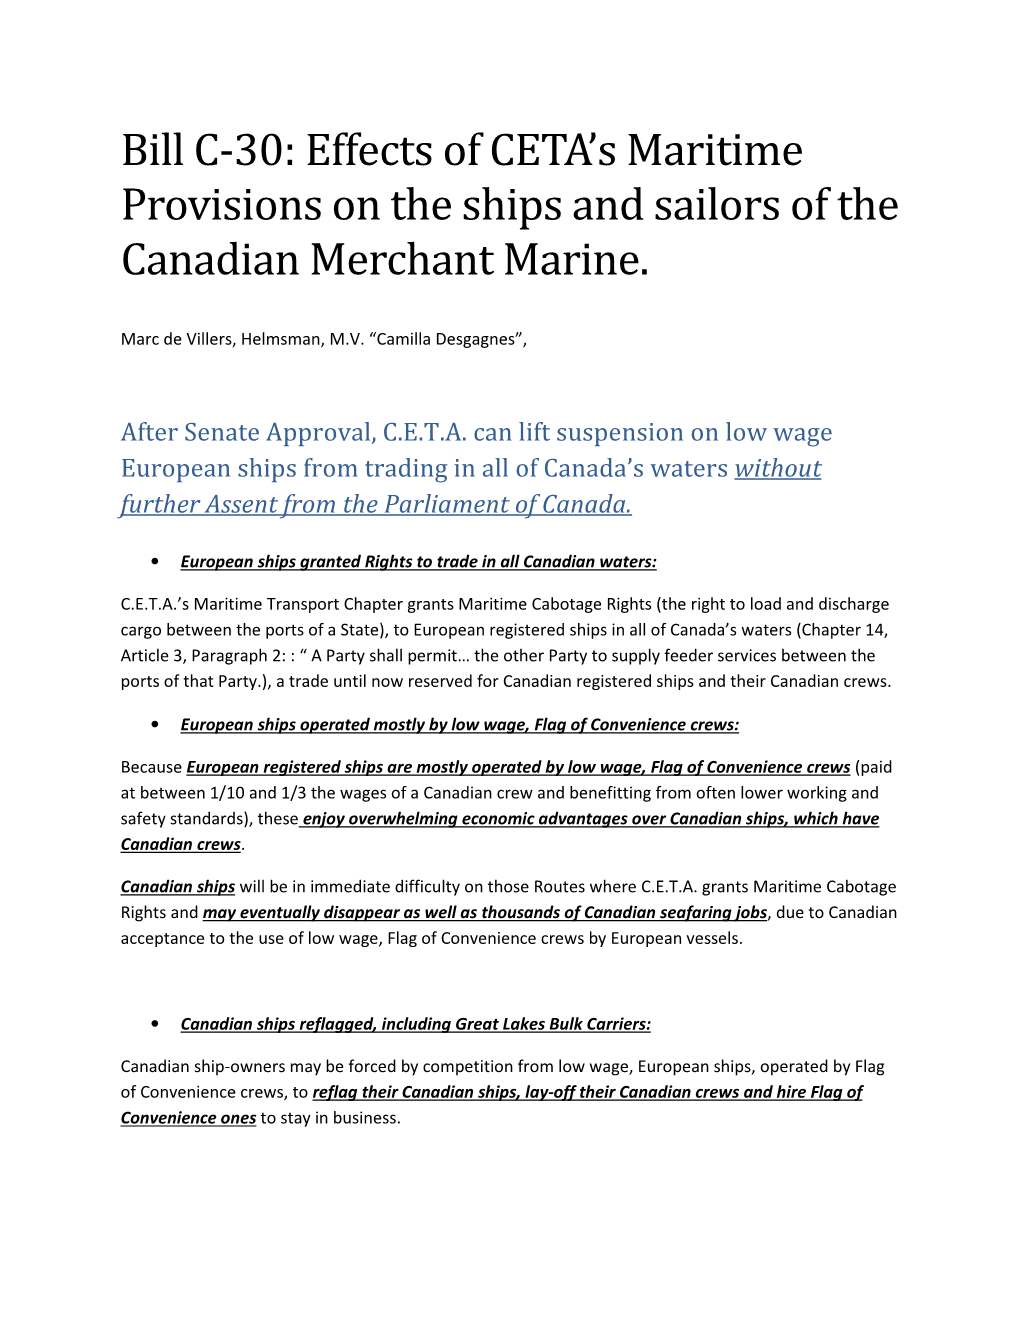 Bill C-30: Effects of CETA's Maritime Provisions on the Ships and Sailors of the Canadian Merchant Marine